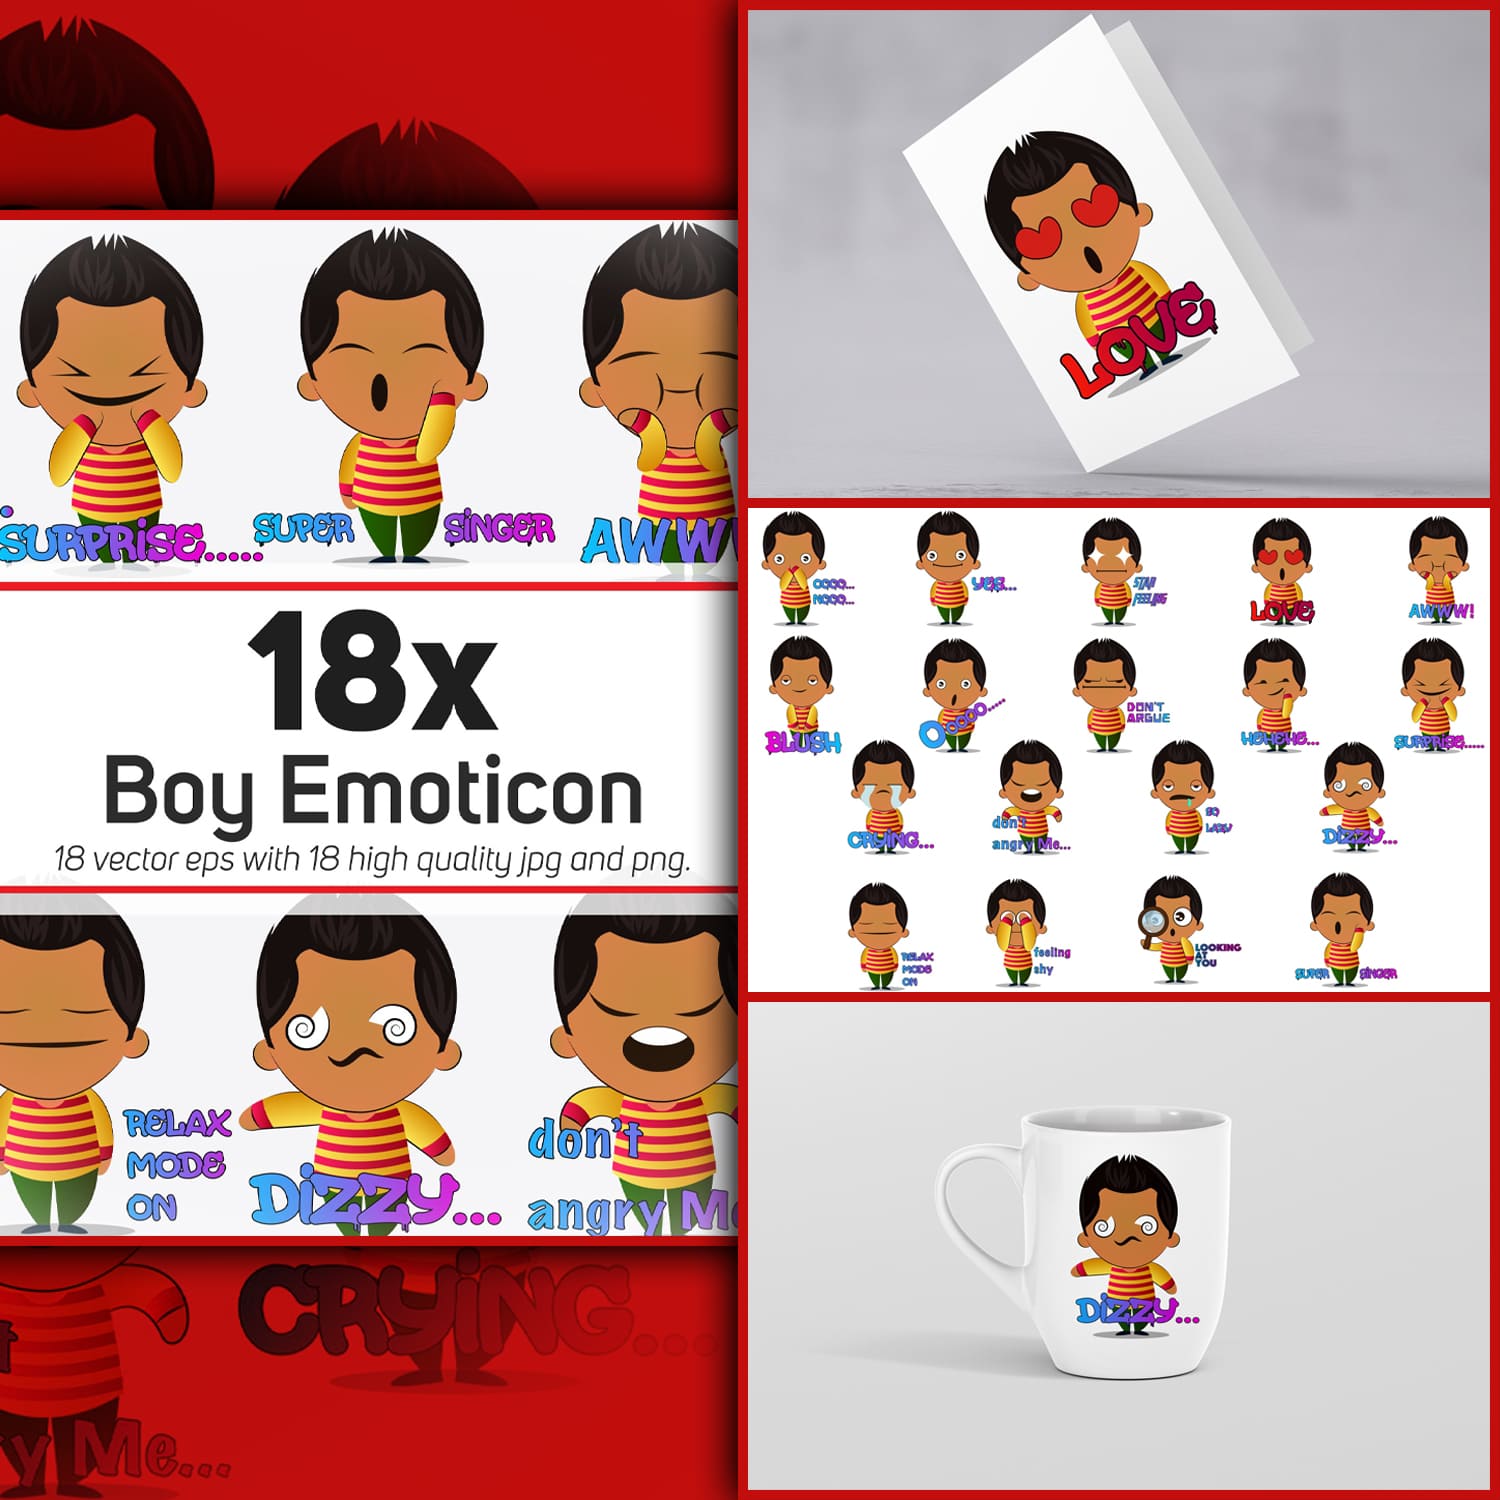 Preview boy emoticon or stickers character collection.